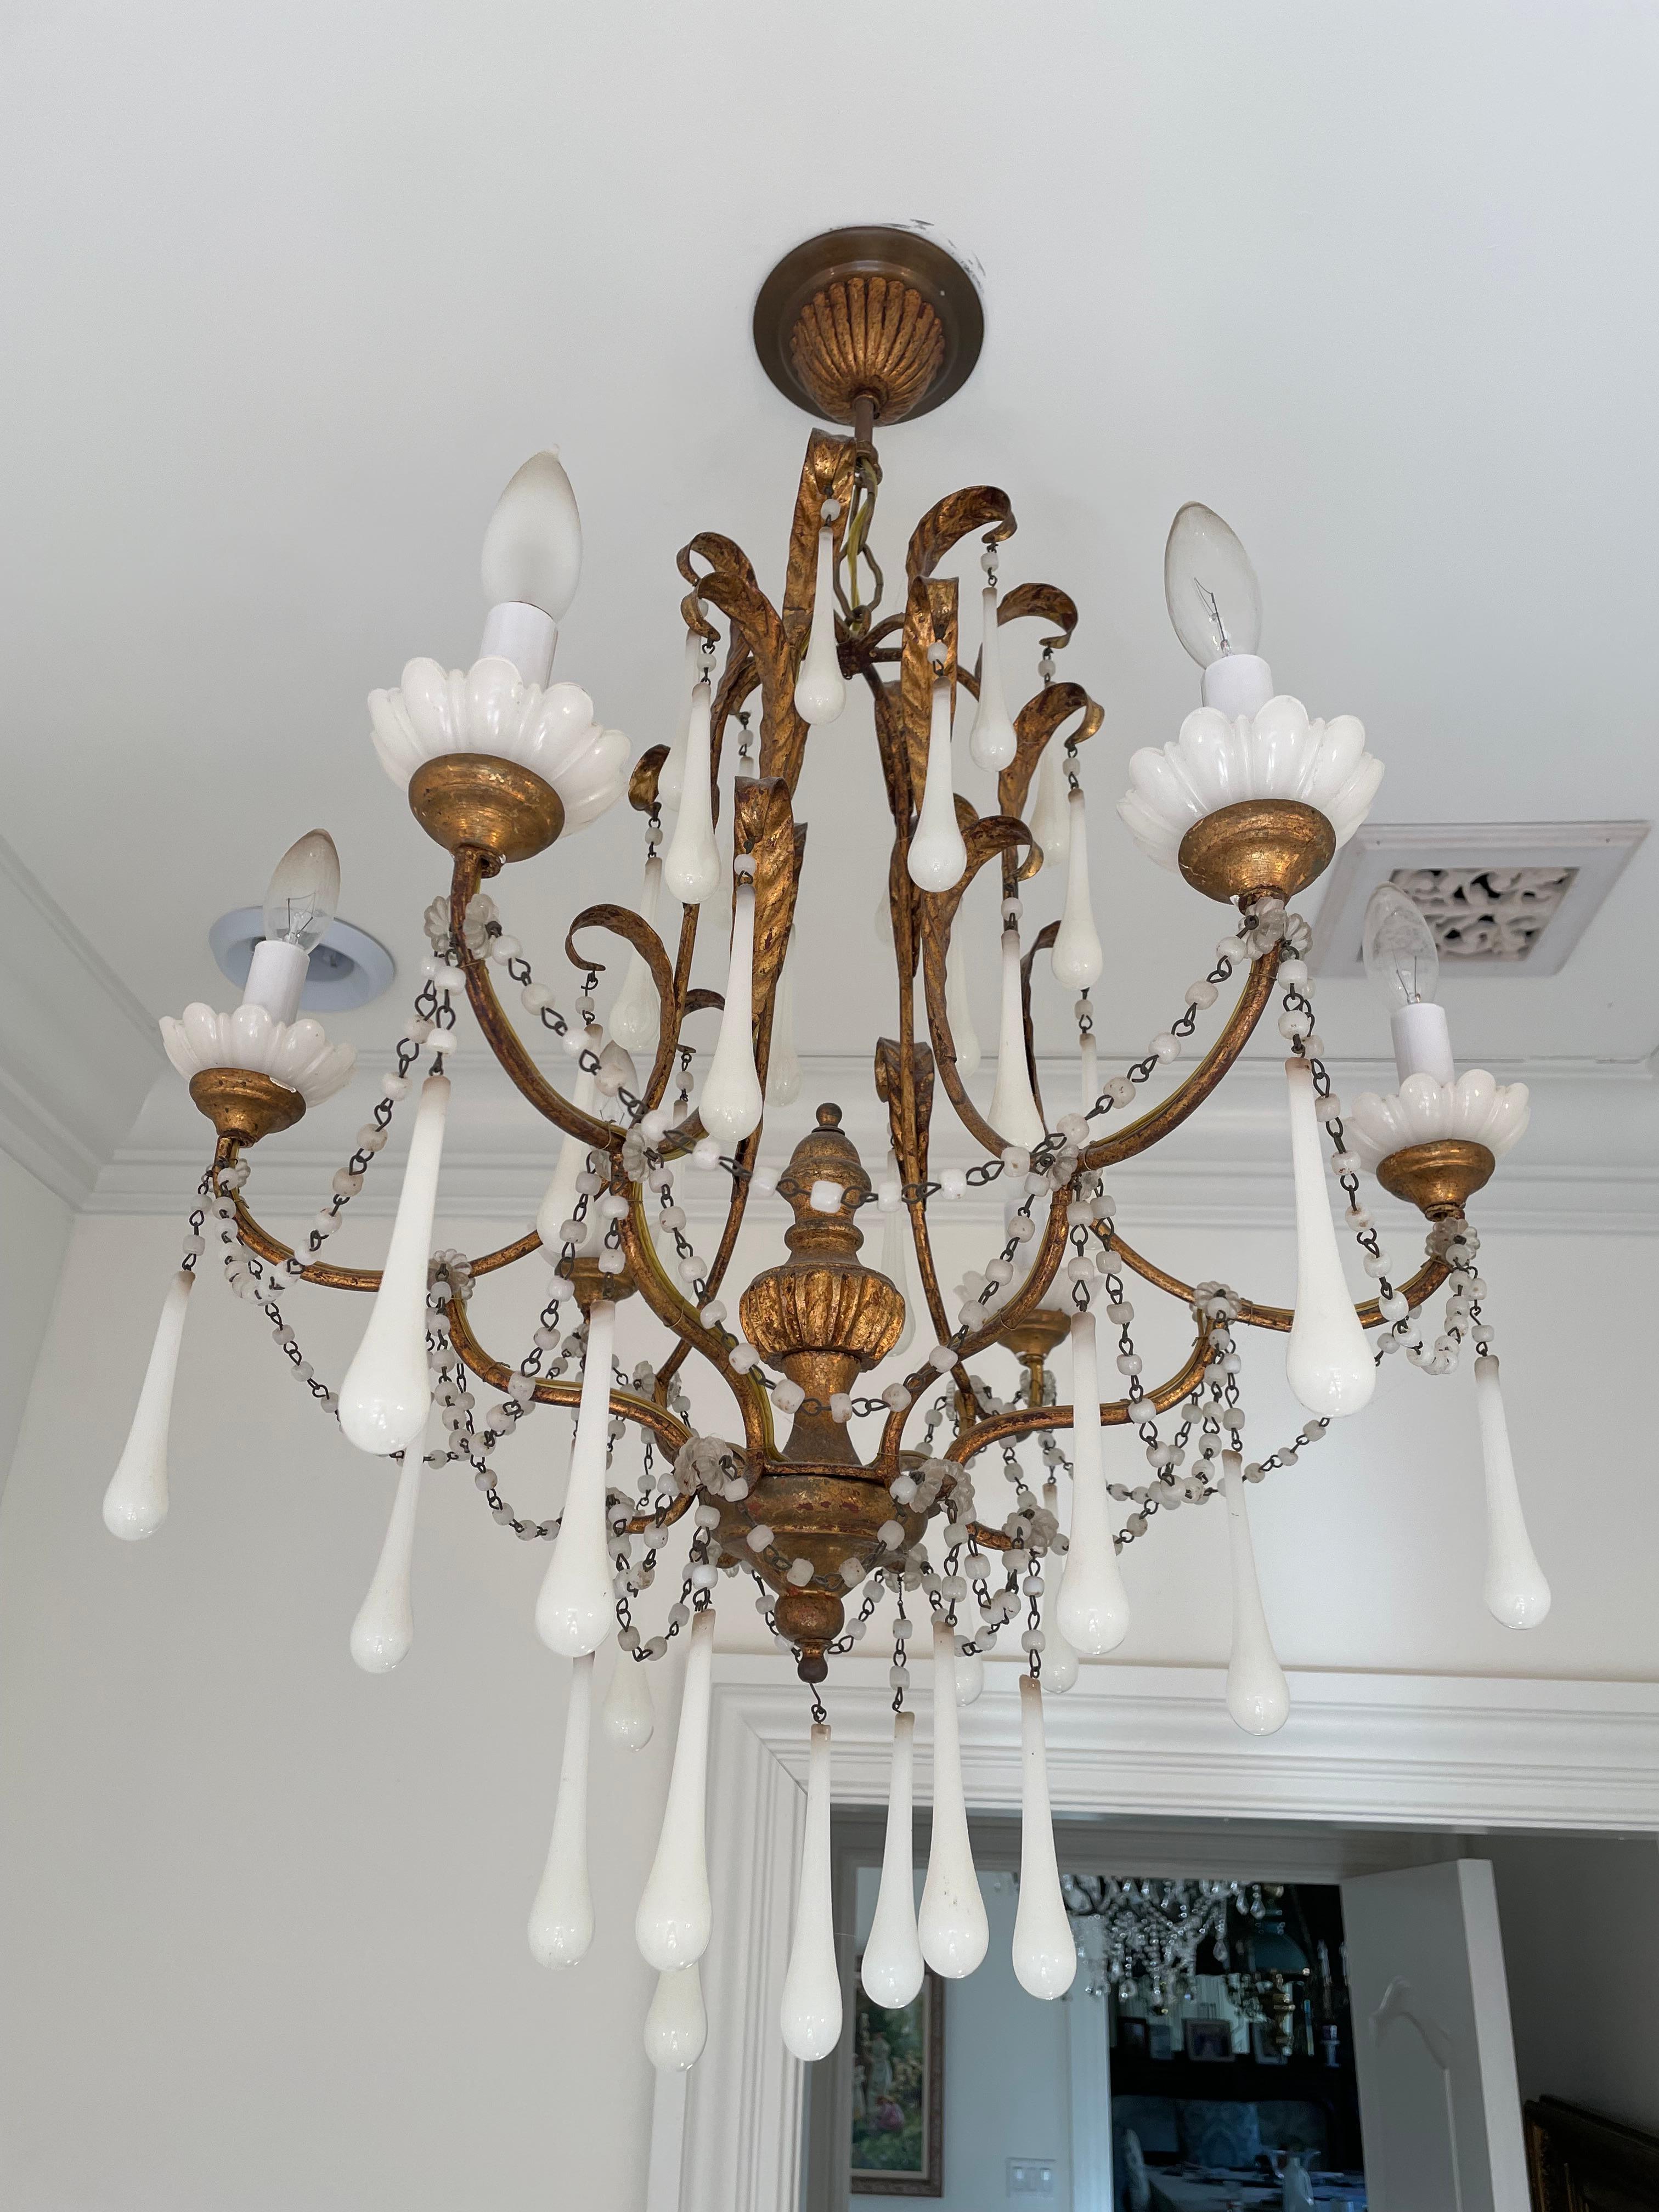 This chandelier is gilt metal with leaves and 6 arms having elegant opaline bobeches. It is dripping with strands of opaline beads and crystals. There is a sphere in the center and has the original fluted canopy. The white opaline beads and crystals